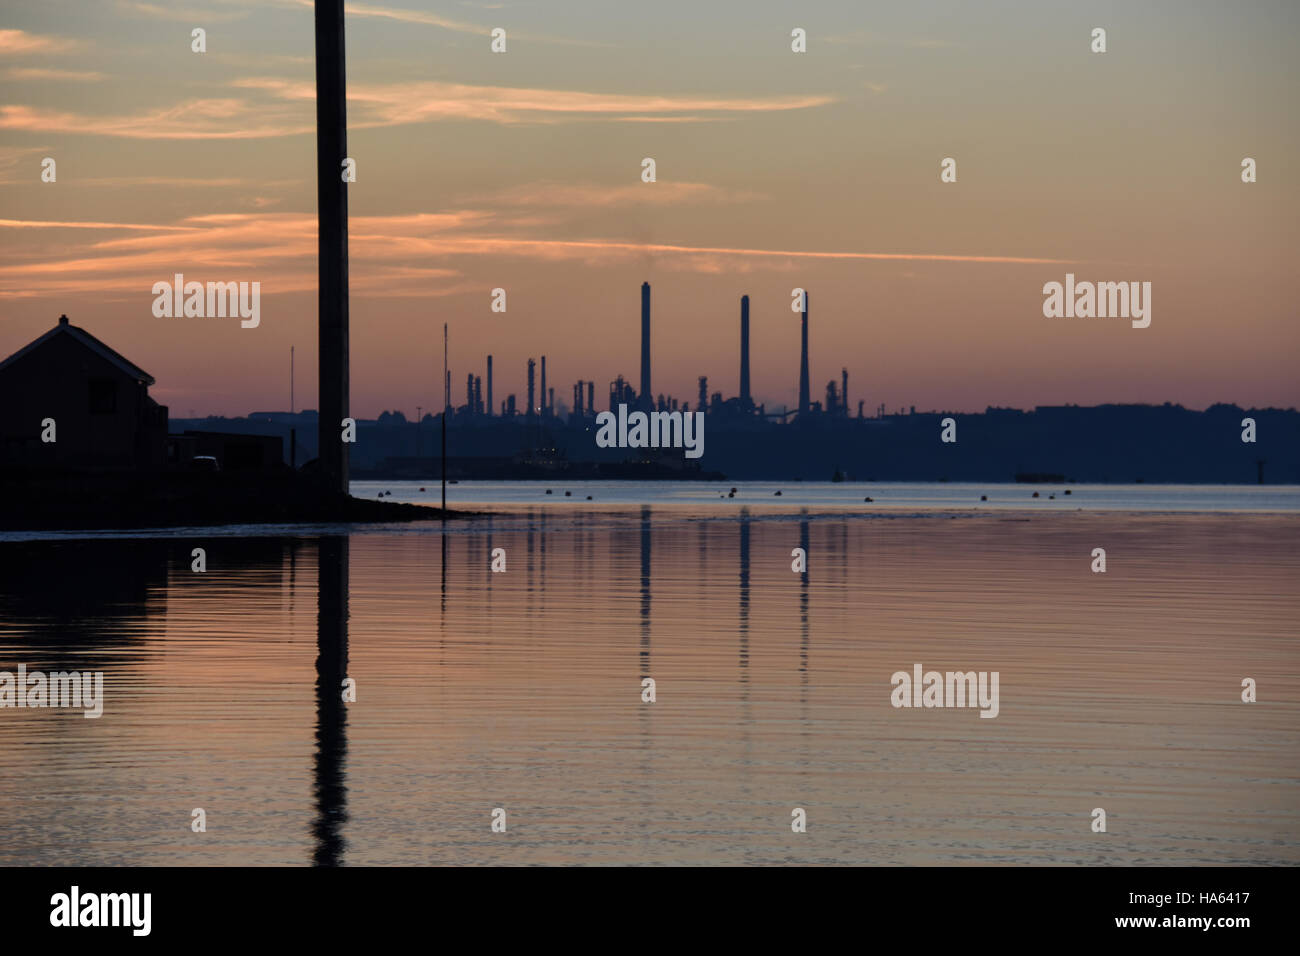 Pembroke refinery silhouetted in a sunset. Reflected in calm water with orange clouds and blue sky Stock Photo